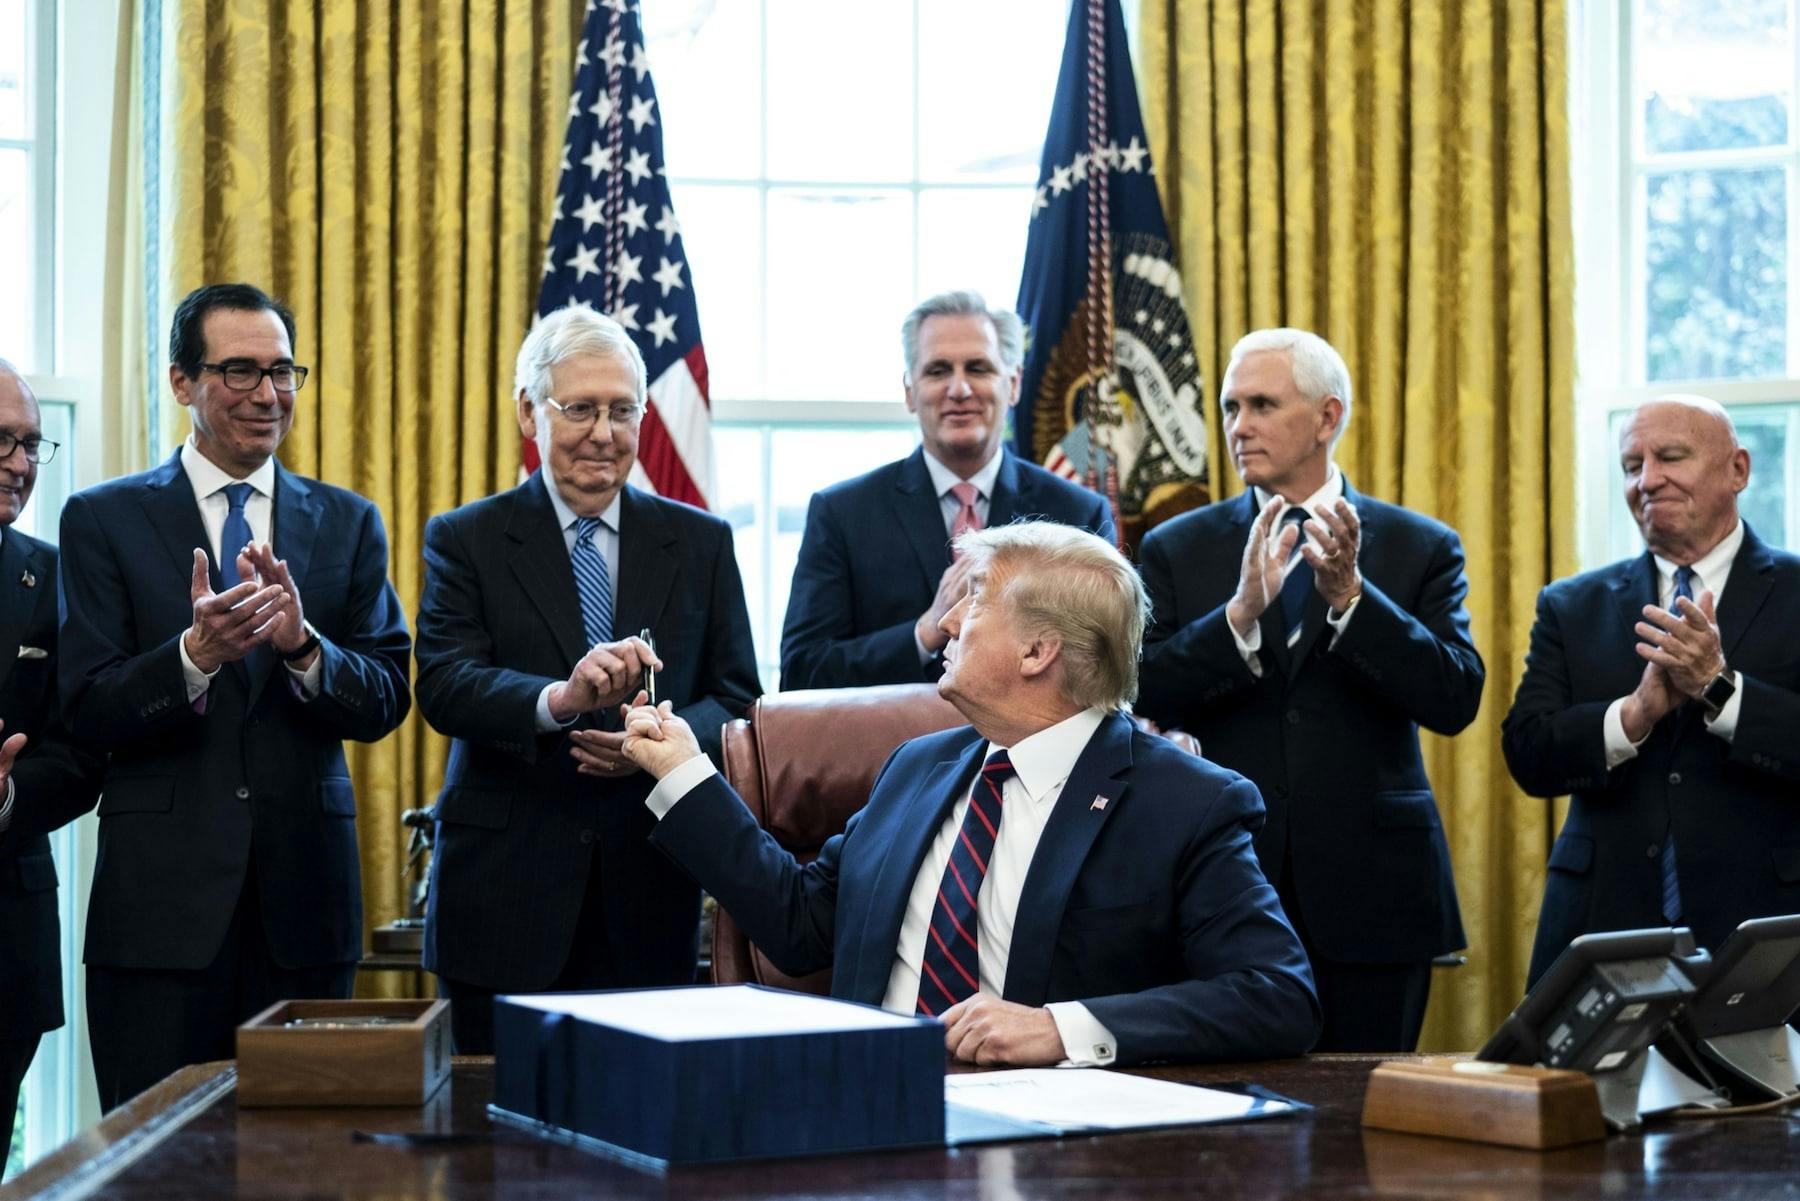 President Donald Trump hands a pen to Senate Majority Leader Mitch McConnell (R-Ky.) after signing the Cares Act on March 27.